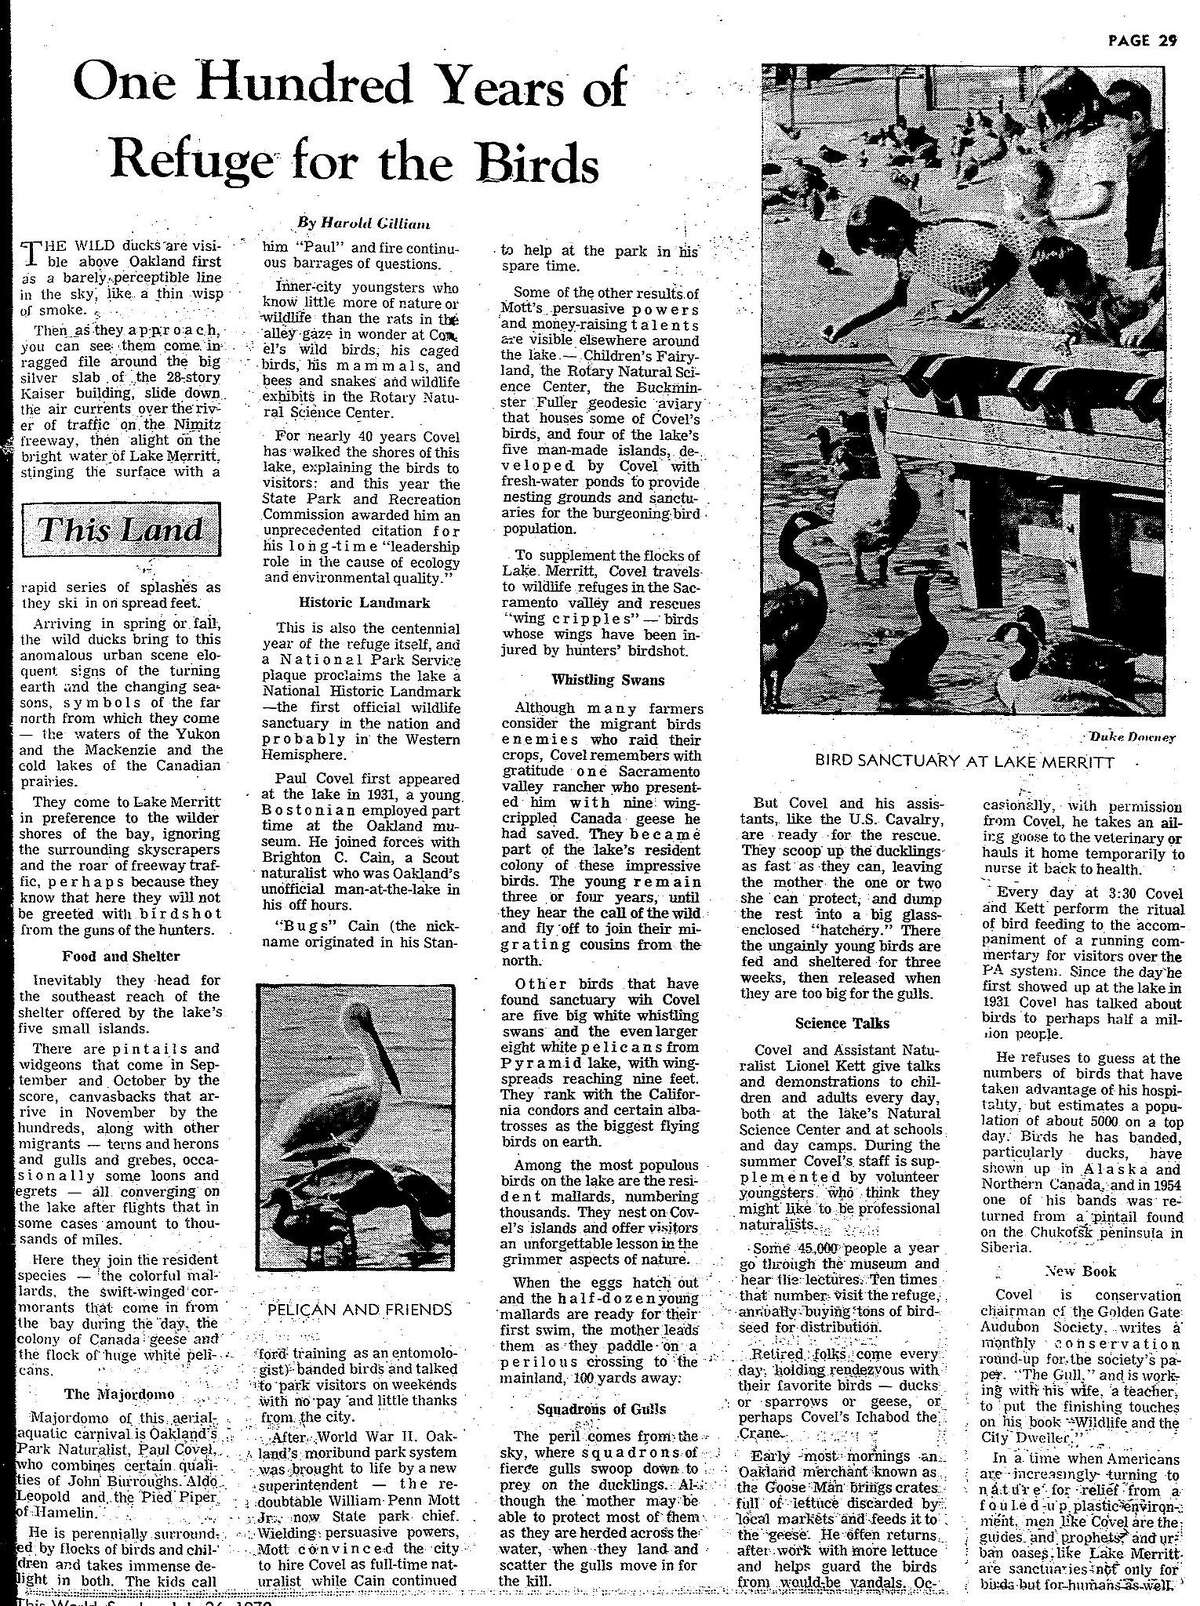 A July 26, 1970 Chronicle article on Lake Merritt, and the 100th anniversary of the bird refuge there.